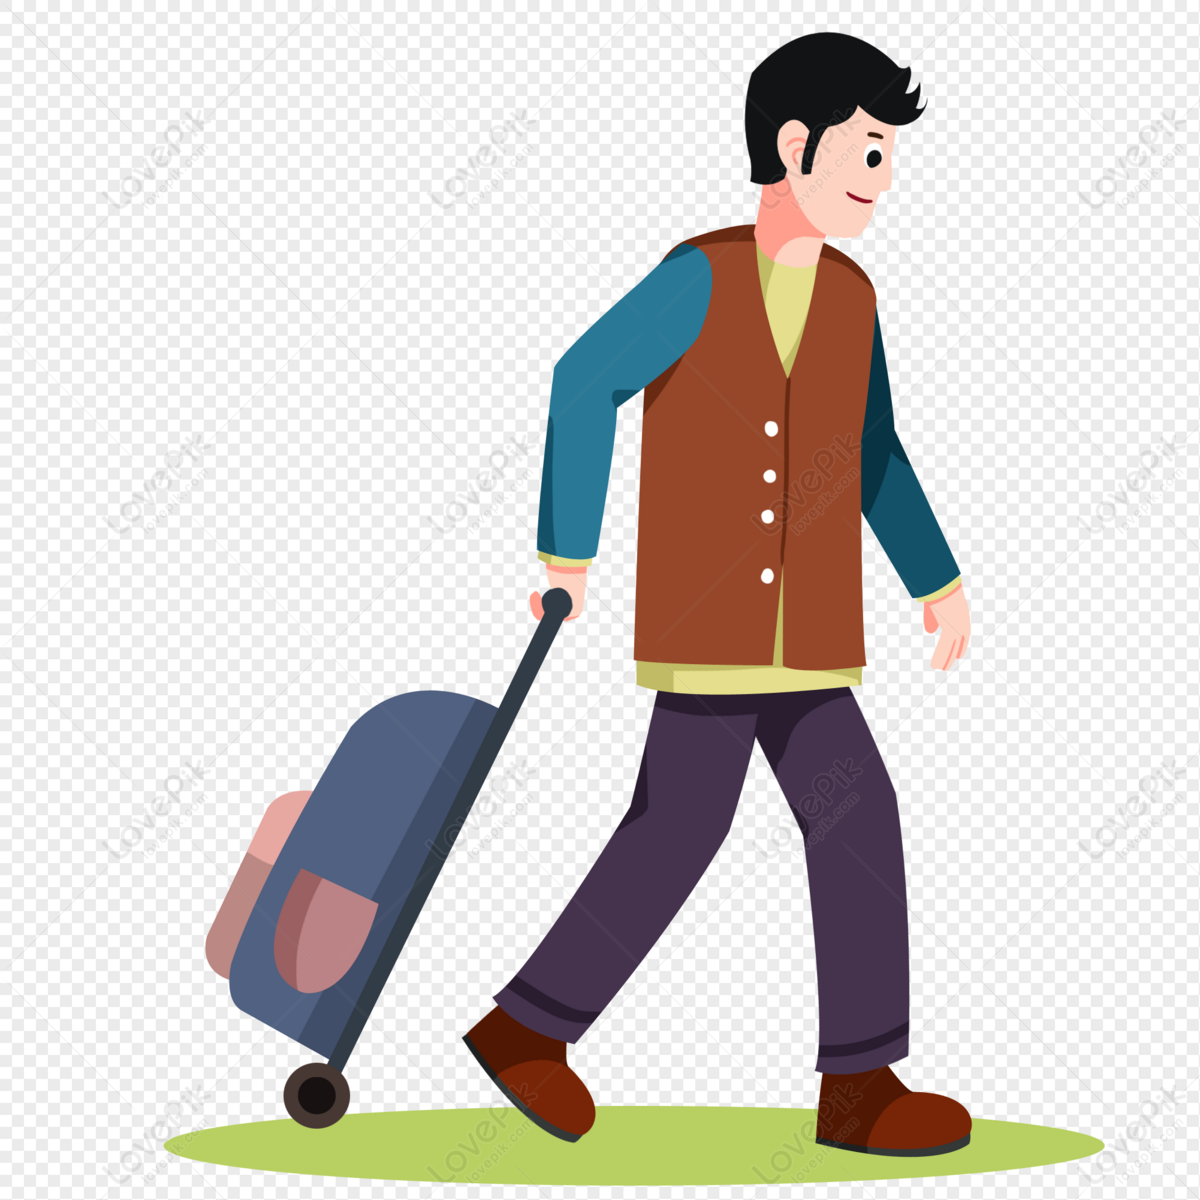 Cartoon Man Pulling Suitcase And Walking In A Hurry PNG Transparent Image  And Clipart Image For Free Download - Lovepik | 401288597